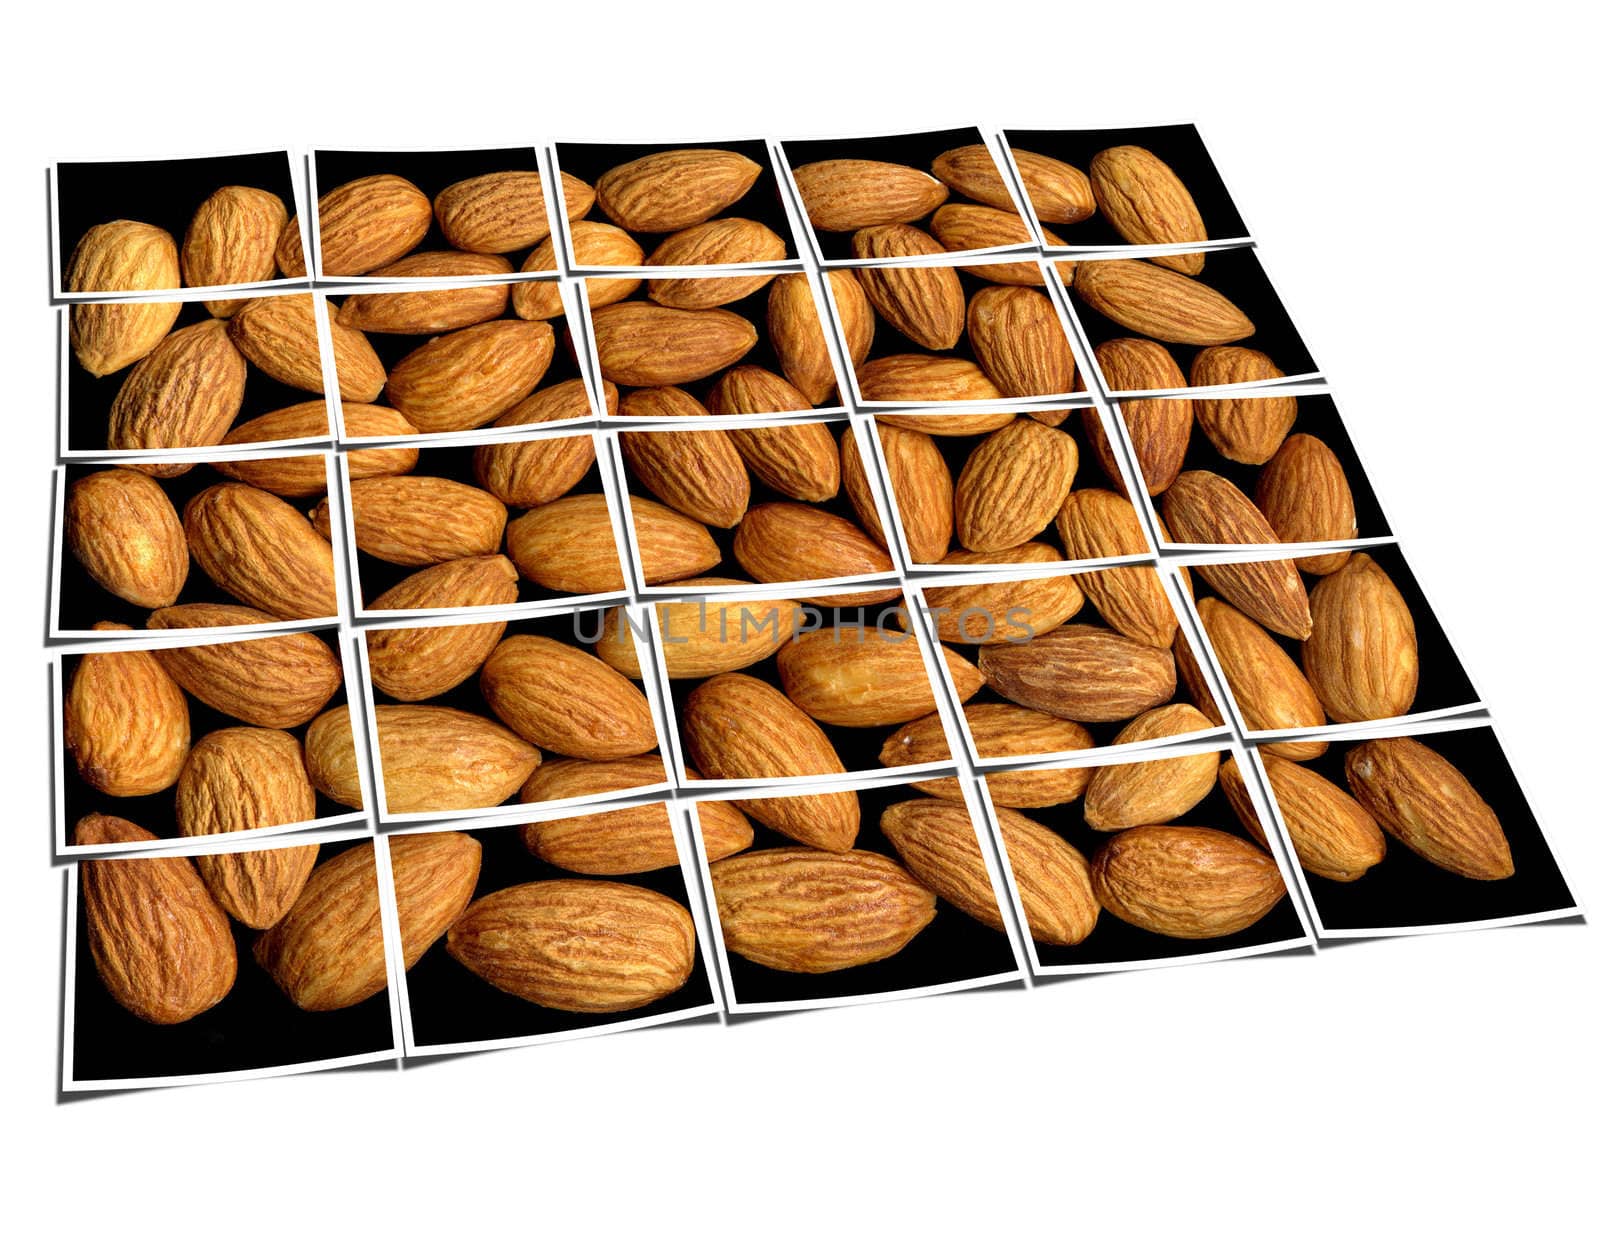 almonds collage  by keko64